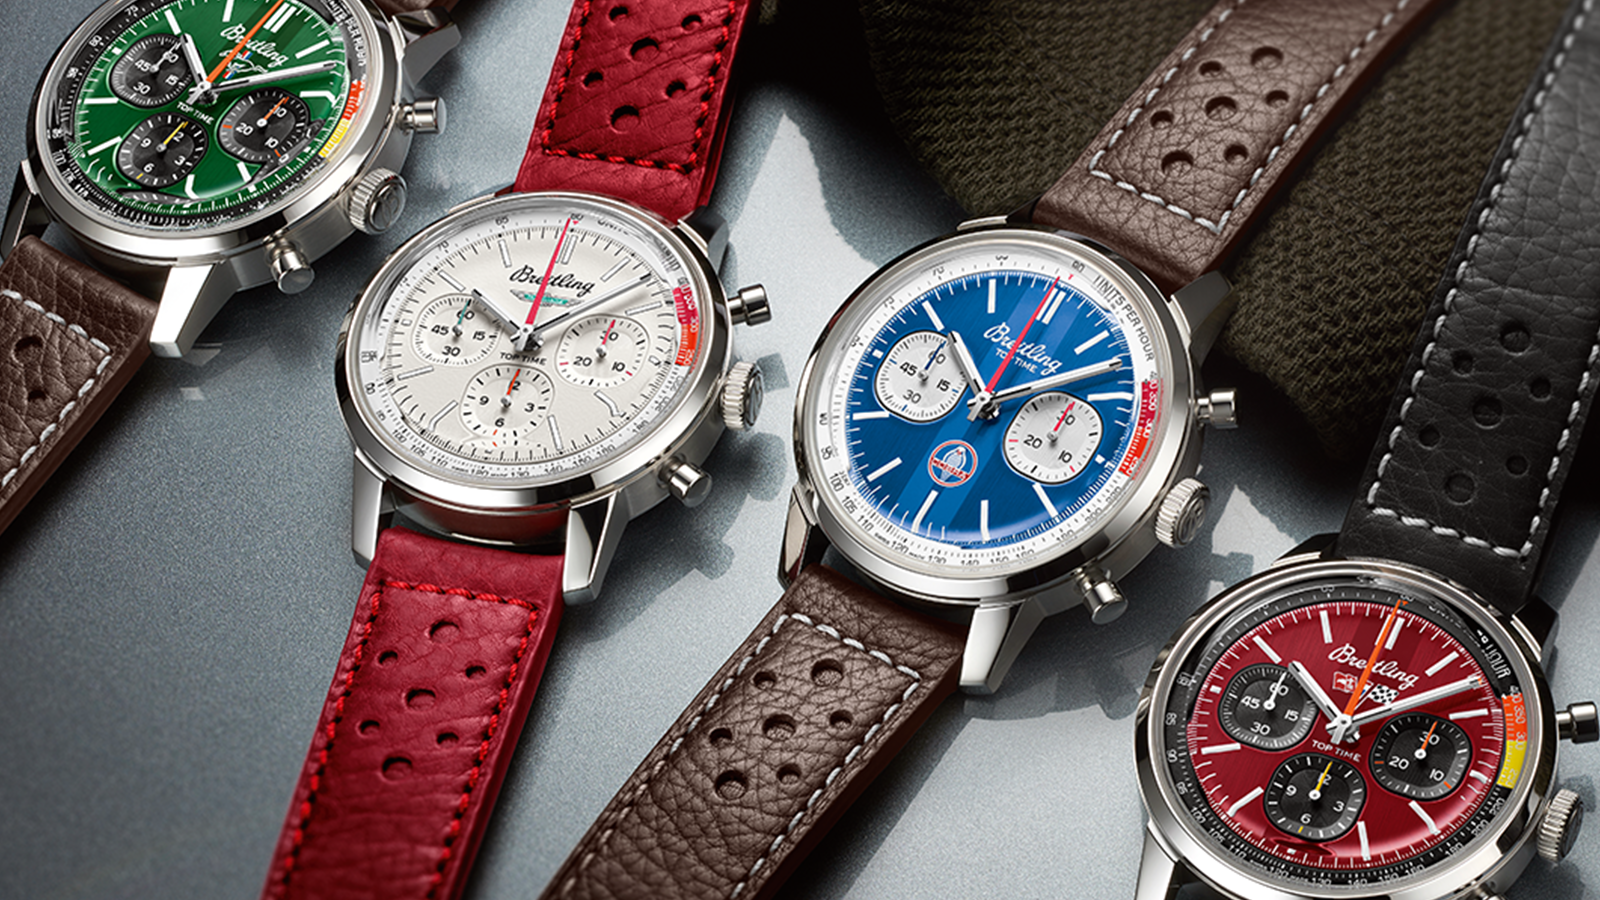 Breitling Top Time - Ford Mustang, Ford Thunderbird, Shelby Cobra and Chevrolet Corvette